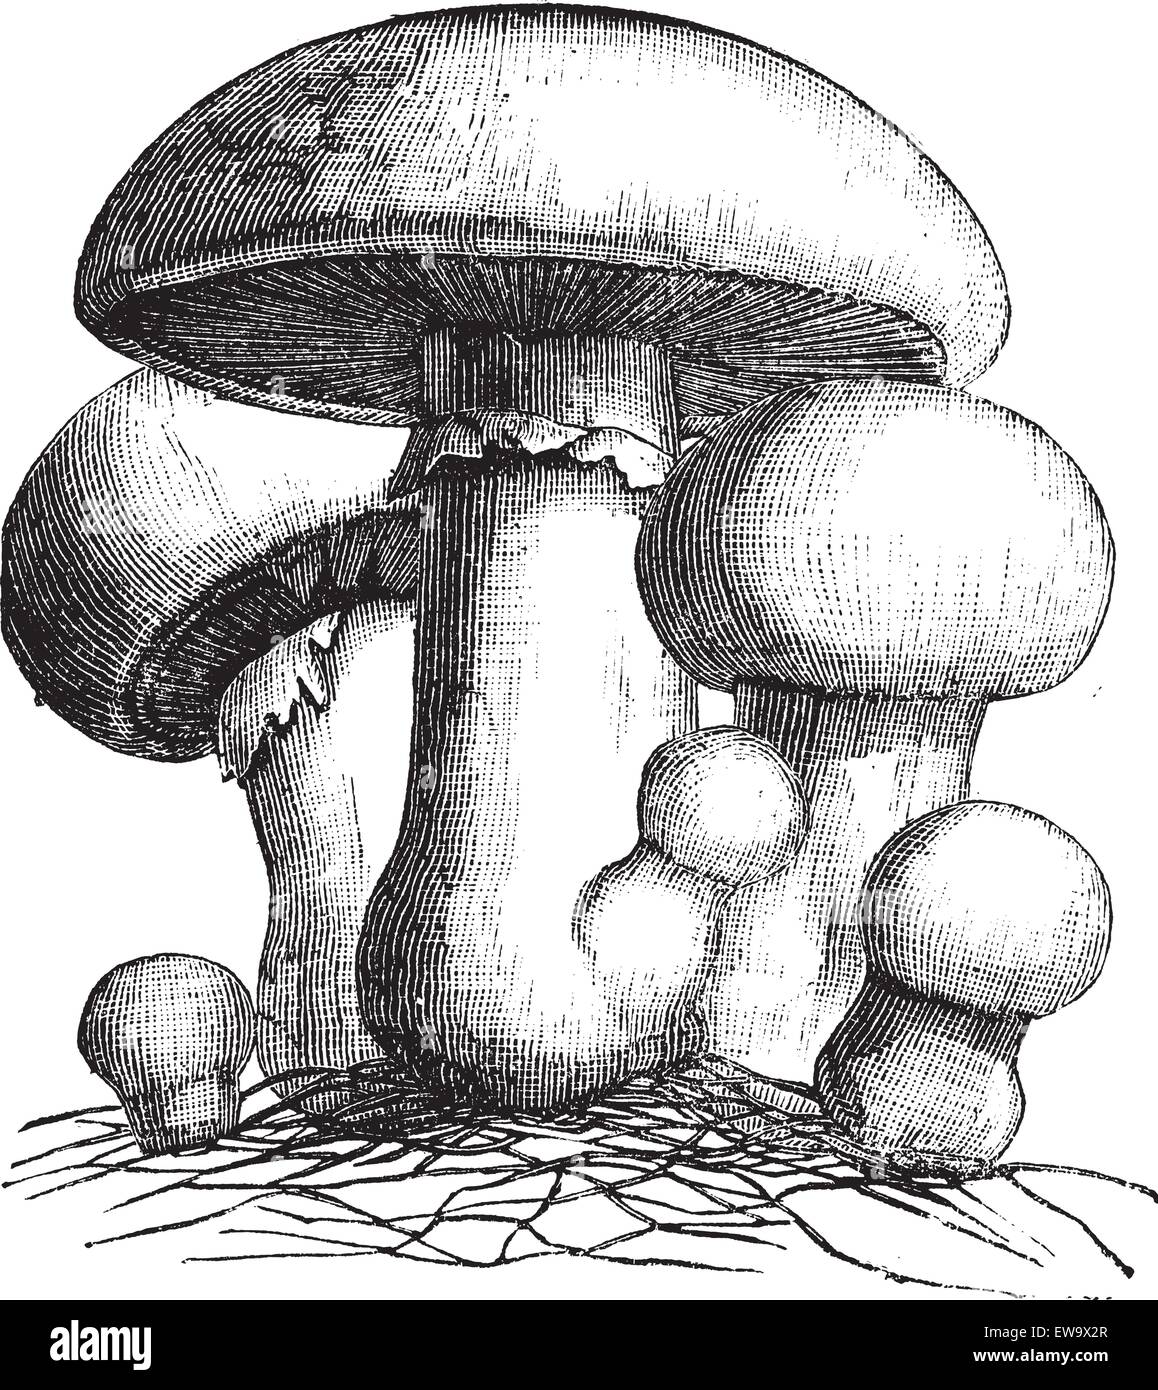 Agaricus campestris or meadow mushroom engraving. Old vintage illustration. Also called field mushroom. A widely eaten edible gilled mushroom. Stock Vector